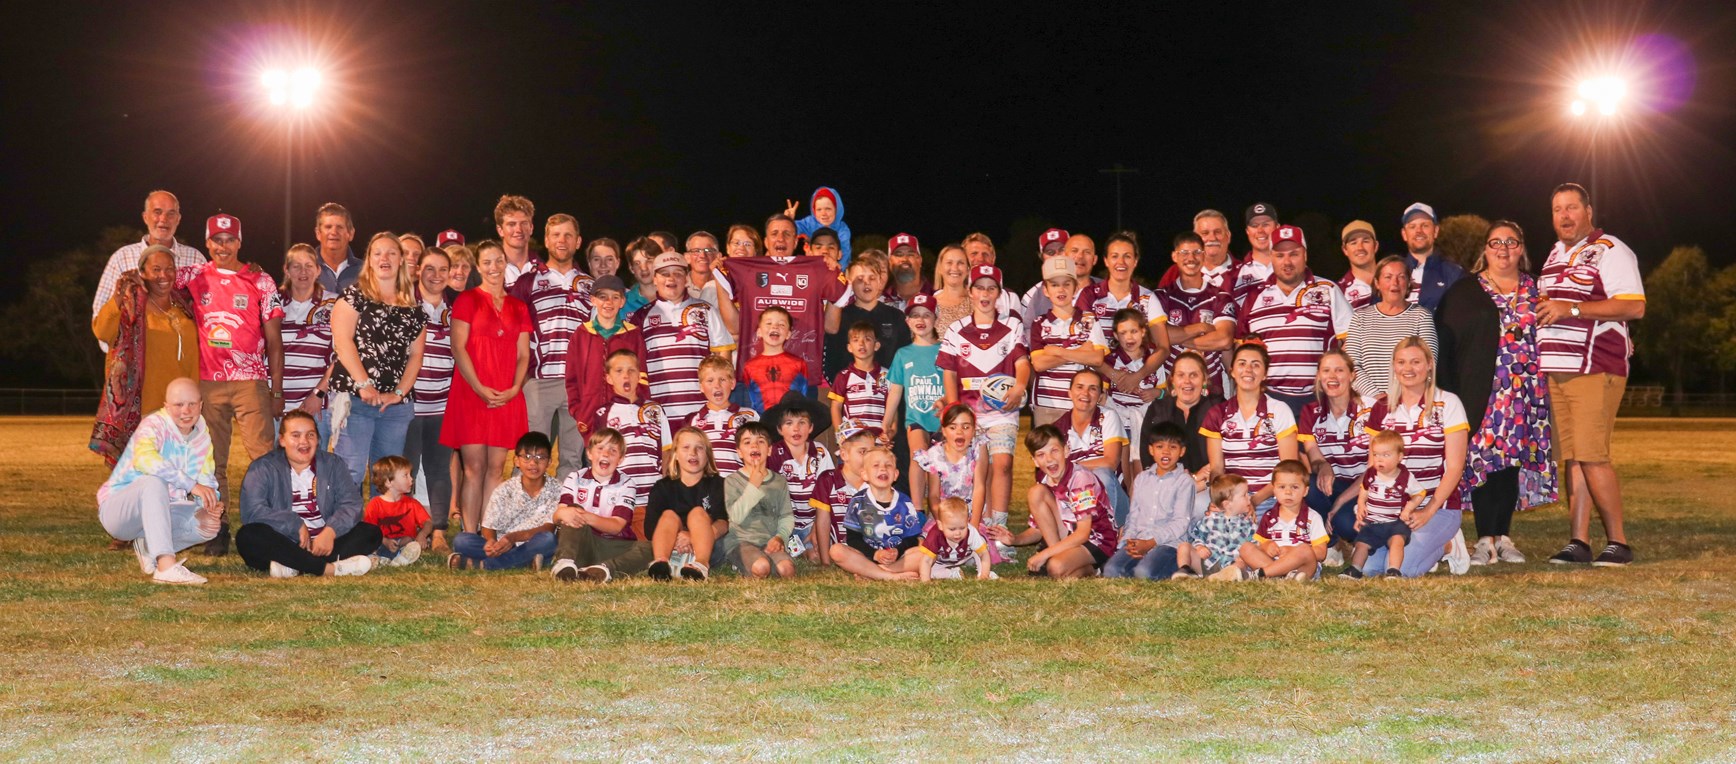 In pictures: Barcaldine celebrates XXXX club of the year honour